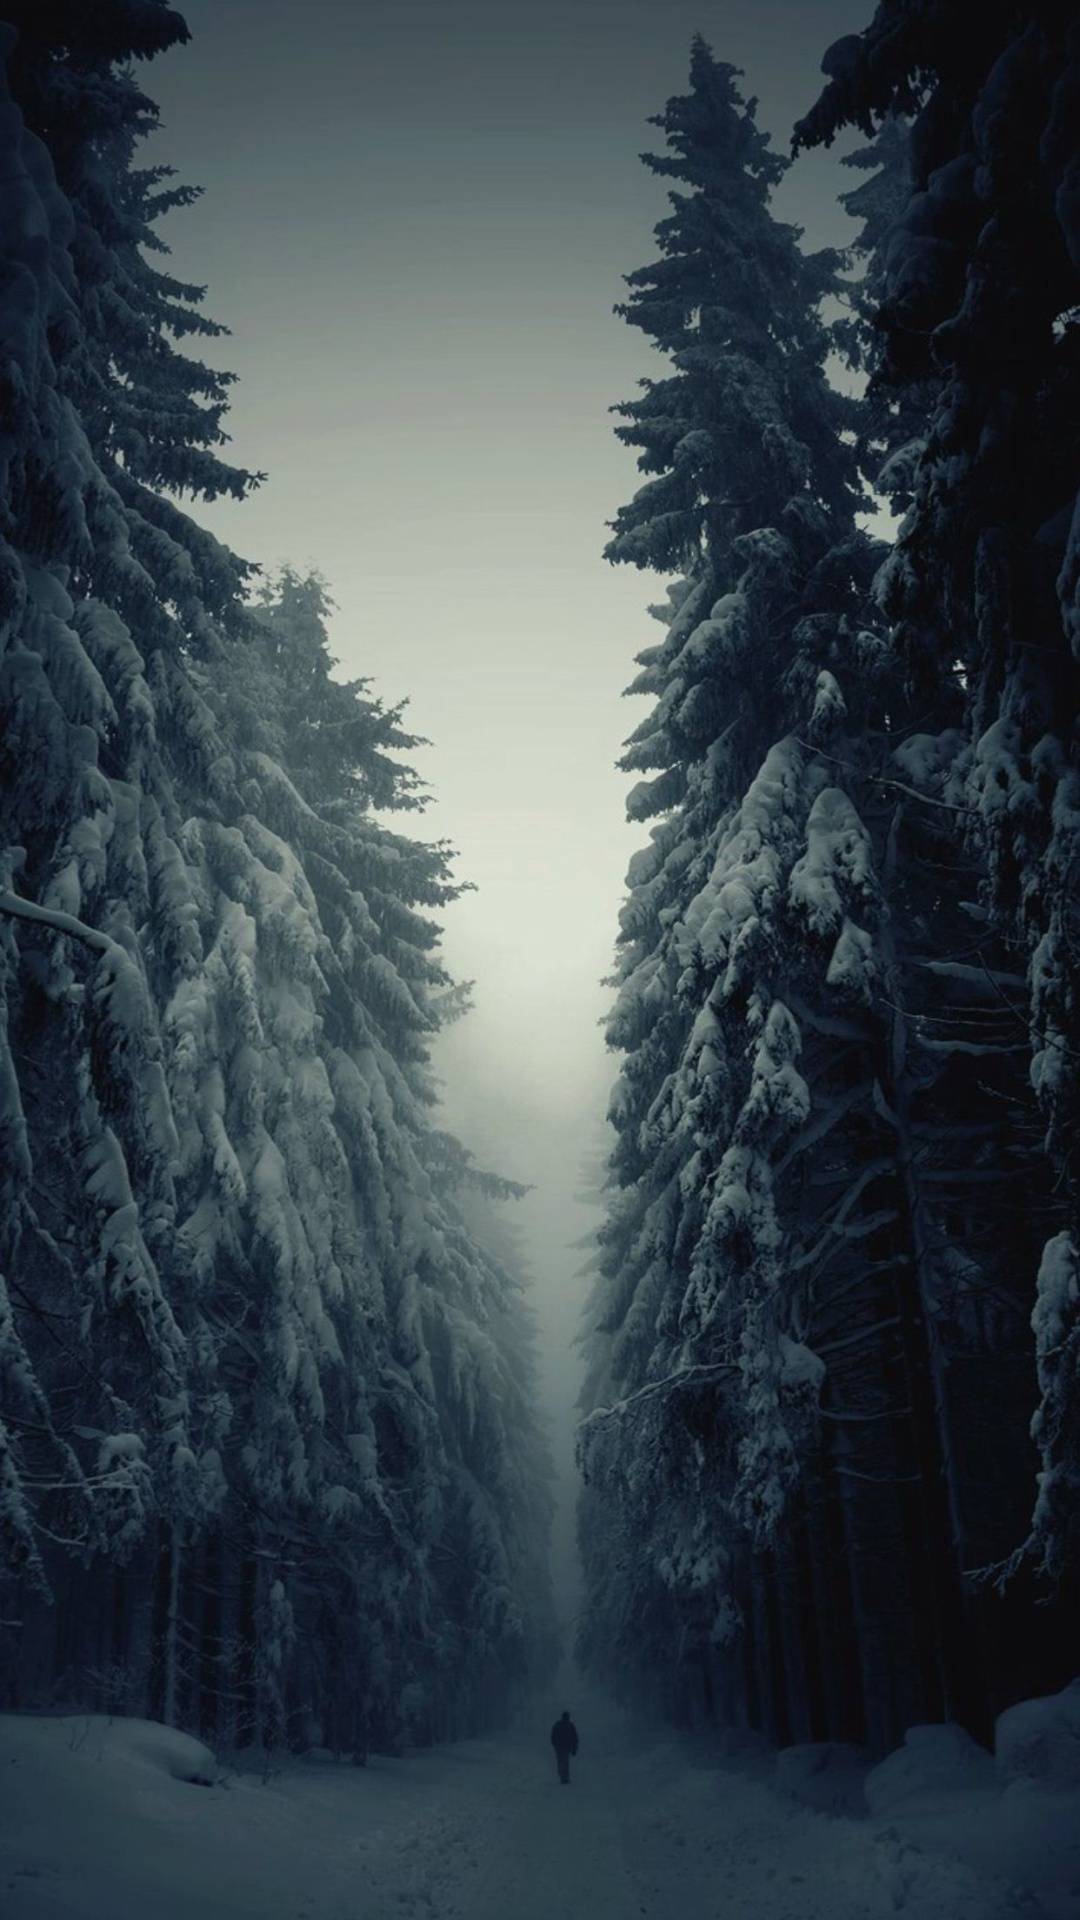 Snow Forest Lonely Walk IPhone Wallpaper Wallpaper, iPhone Wallpaper